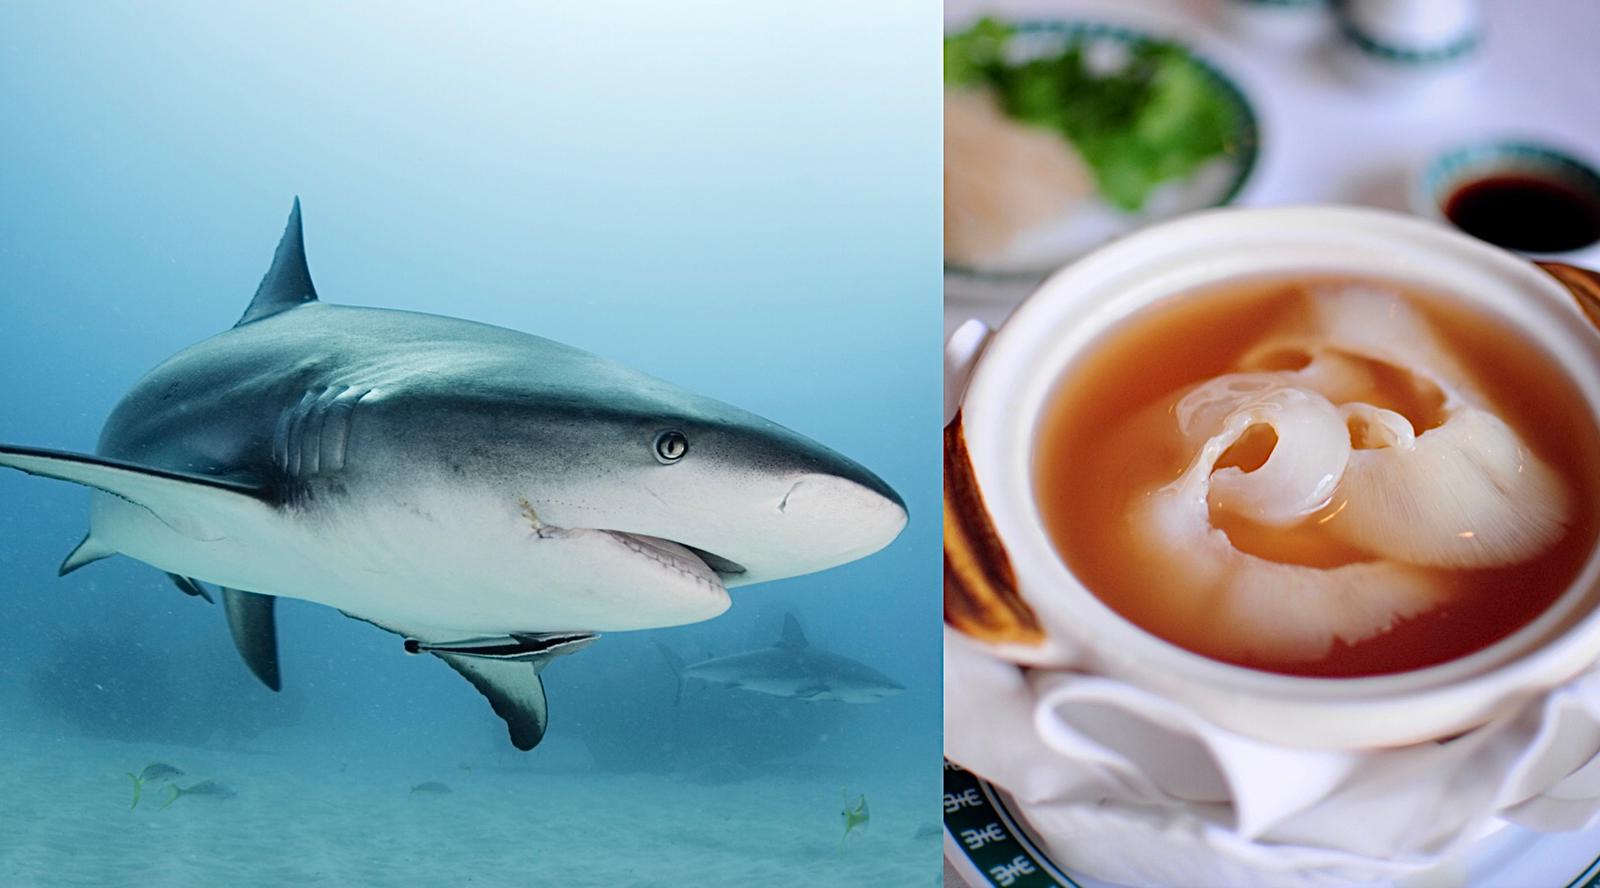 Sale and trade of shark fins to continue in Florida, despite